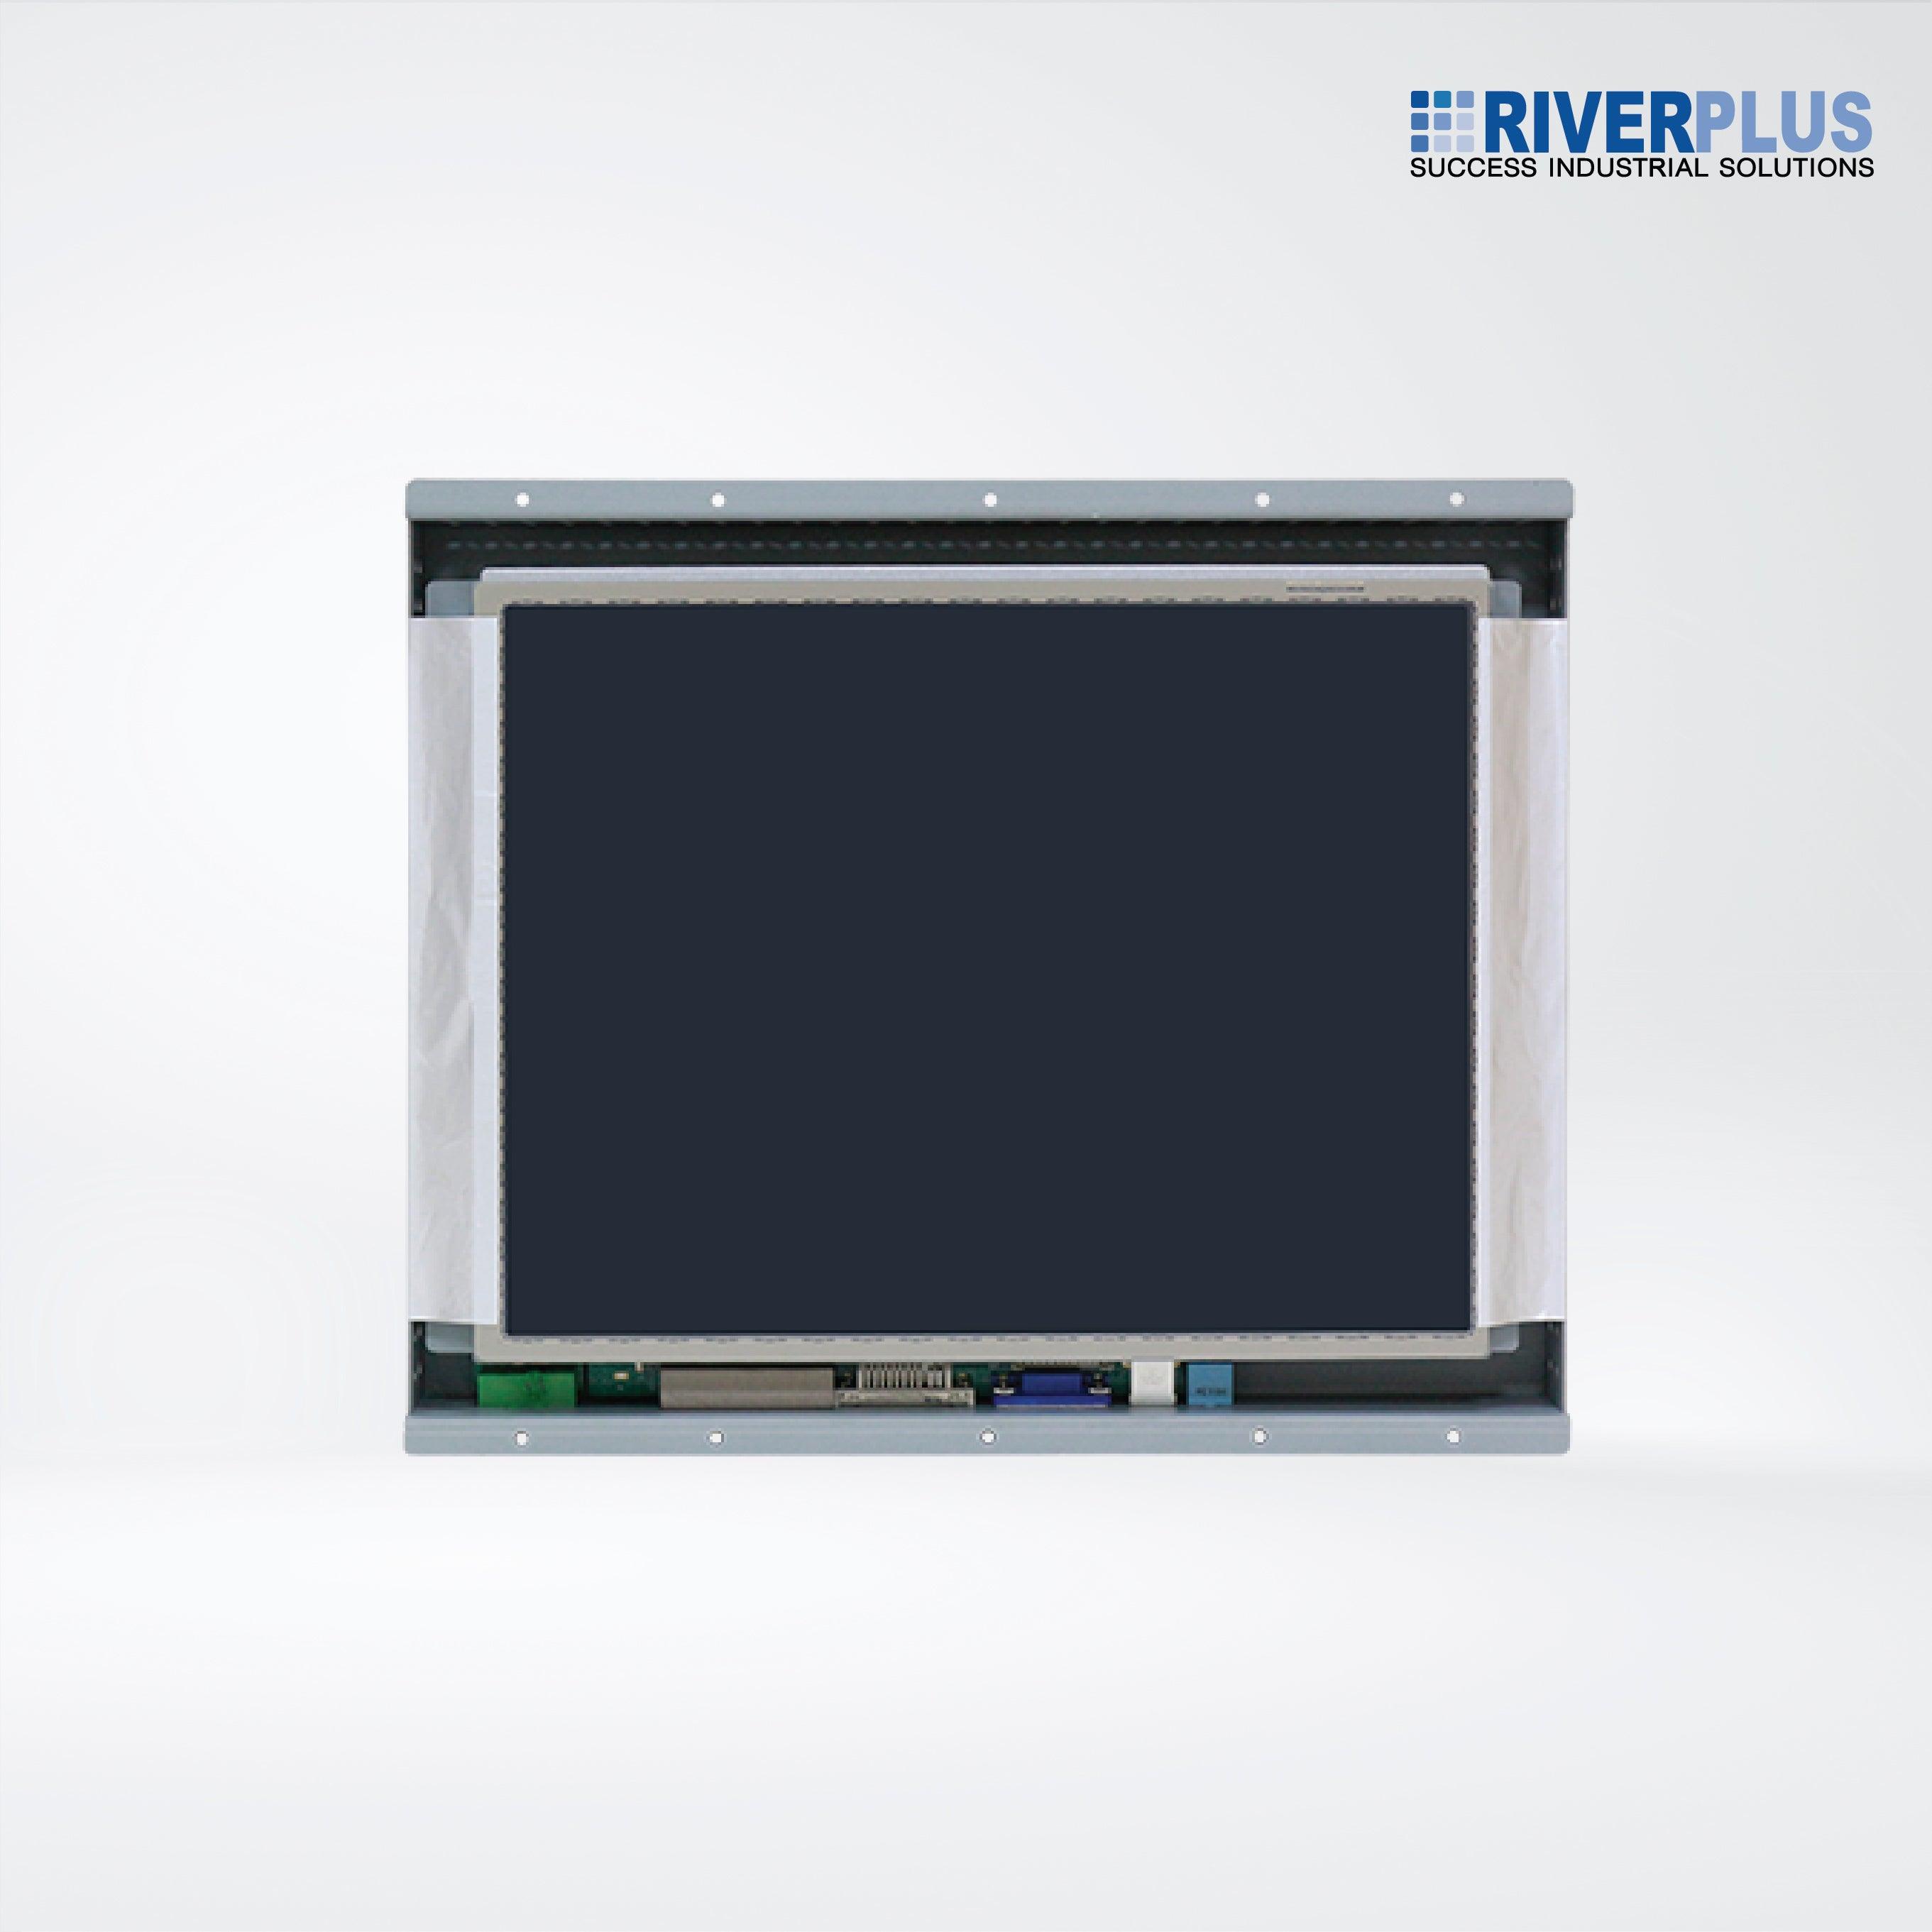 OPD-1126A 12.1" Open Frame Design Industrial Display - Riverplus